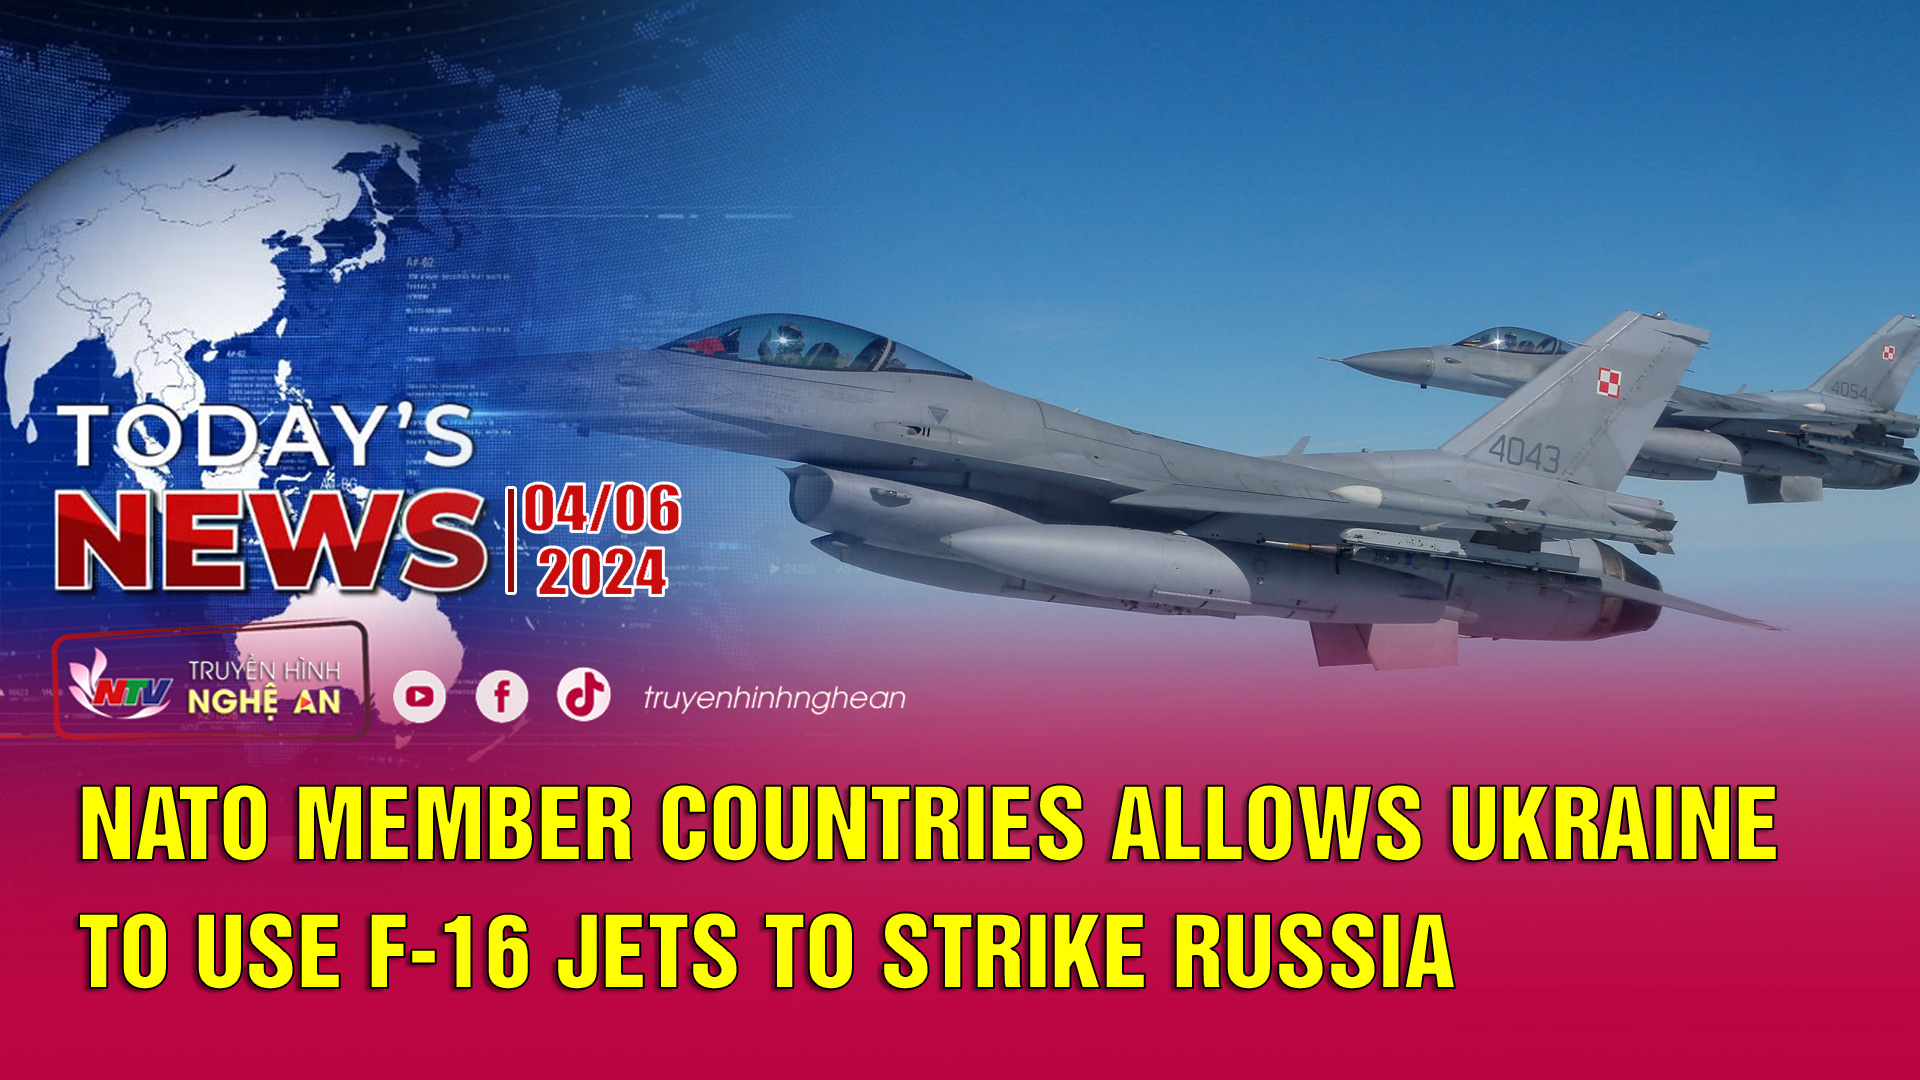 Today's News 04/6/2024: NATO member countries allows Ukraine to use F-16 jets to strike Russia